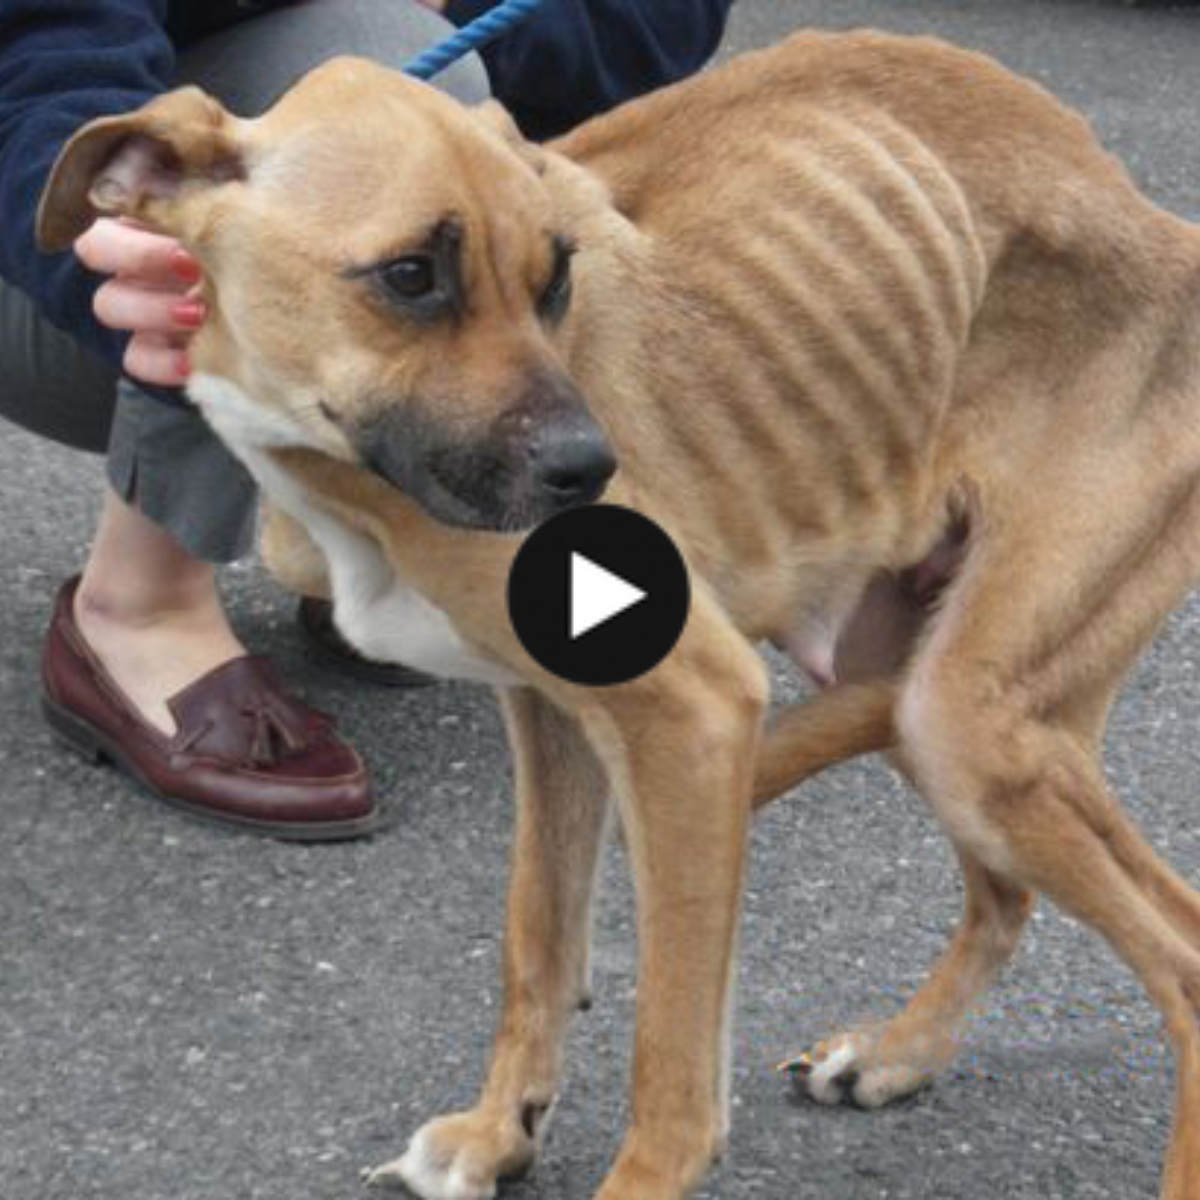 A heartwarming tale: A malnourished, ill, and skinny puppy is in need of compassionate individuals’ attention.